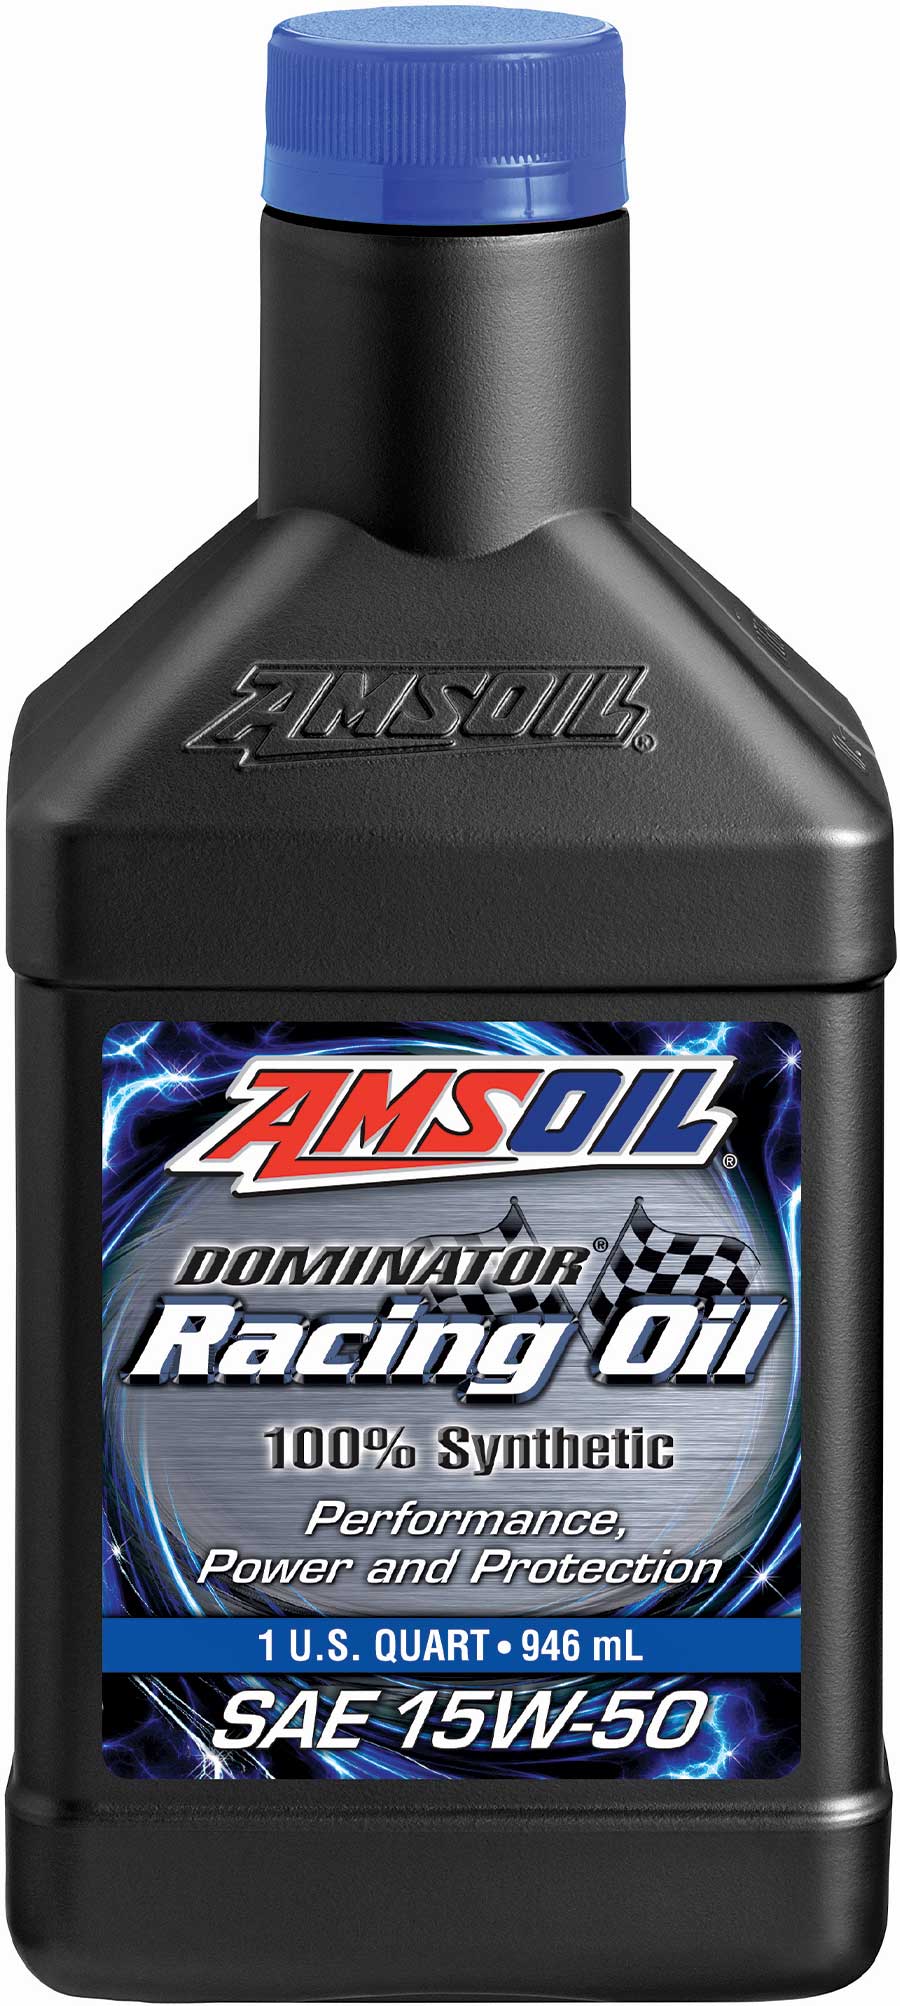 Dominator Racing Oil is specifically for racing and high-performance engines that receive frequent oil changes. Fortified with antiwear additives for extra protection proprietary friction modifiers maximize horsepower and torque.